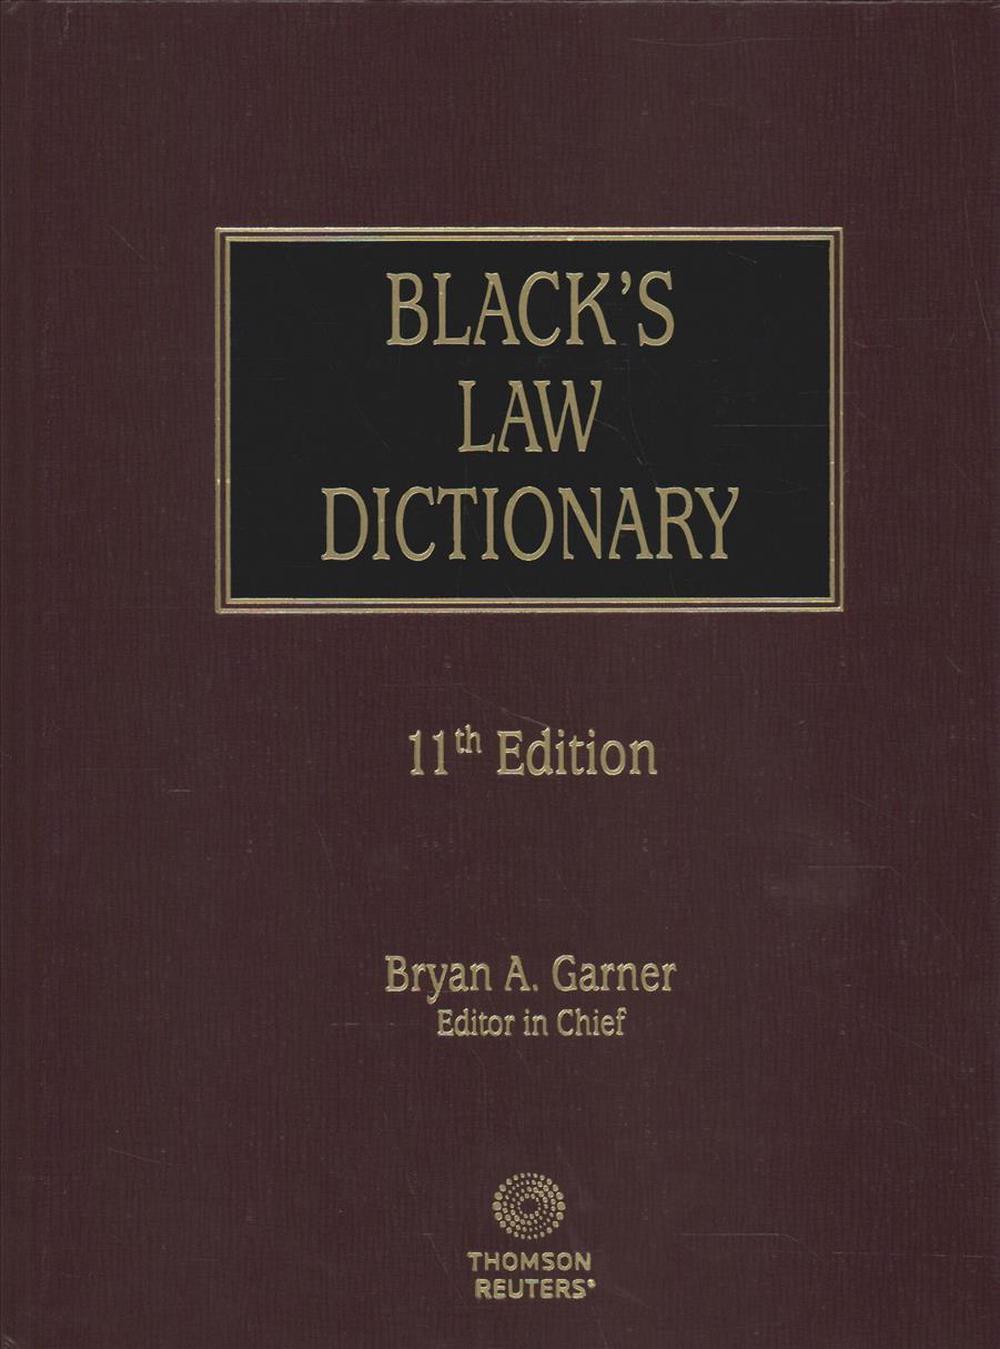 Black Law Disctionary 11th Edition by Brian Barner Hardcover Book Free